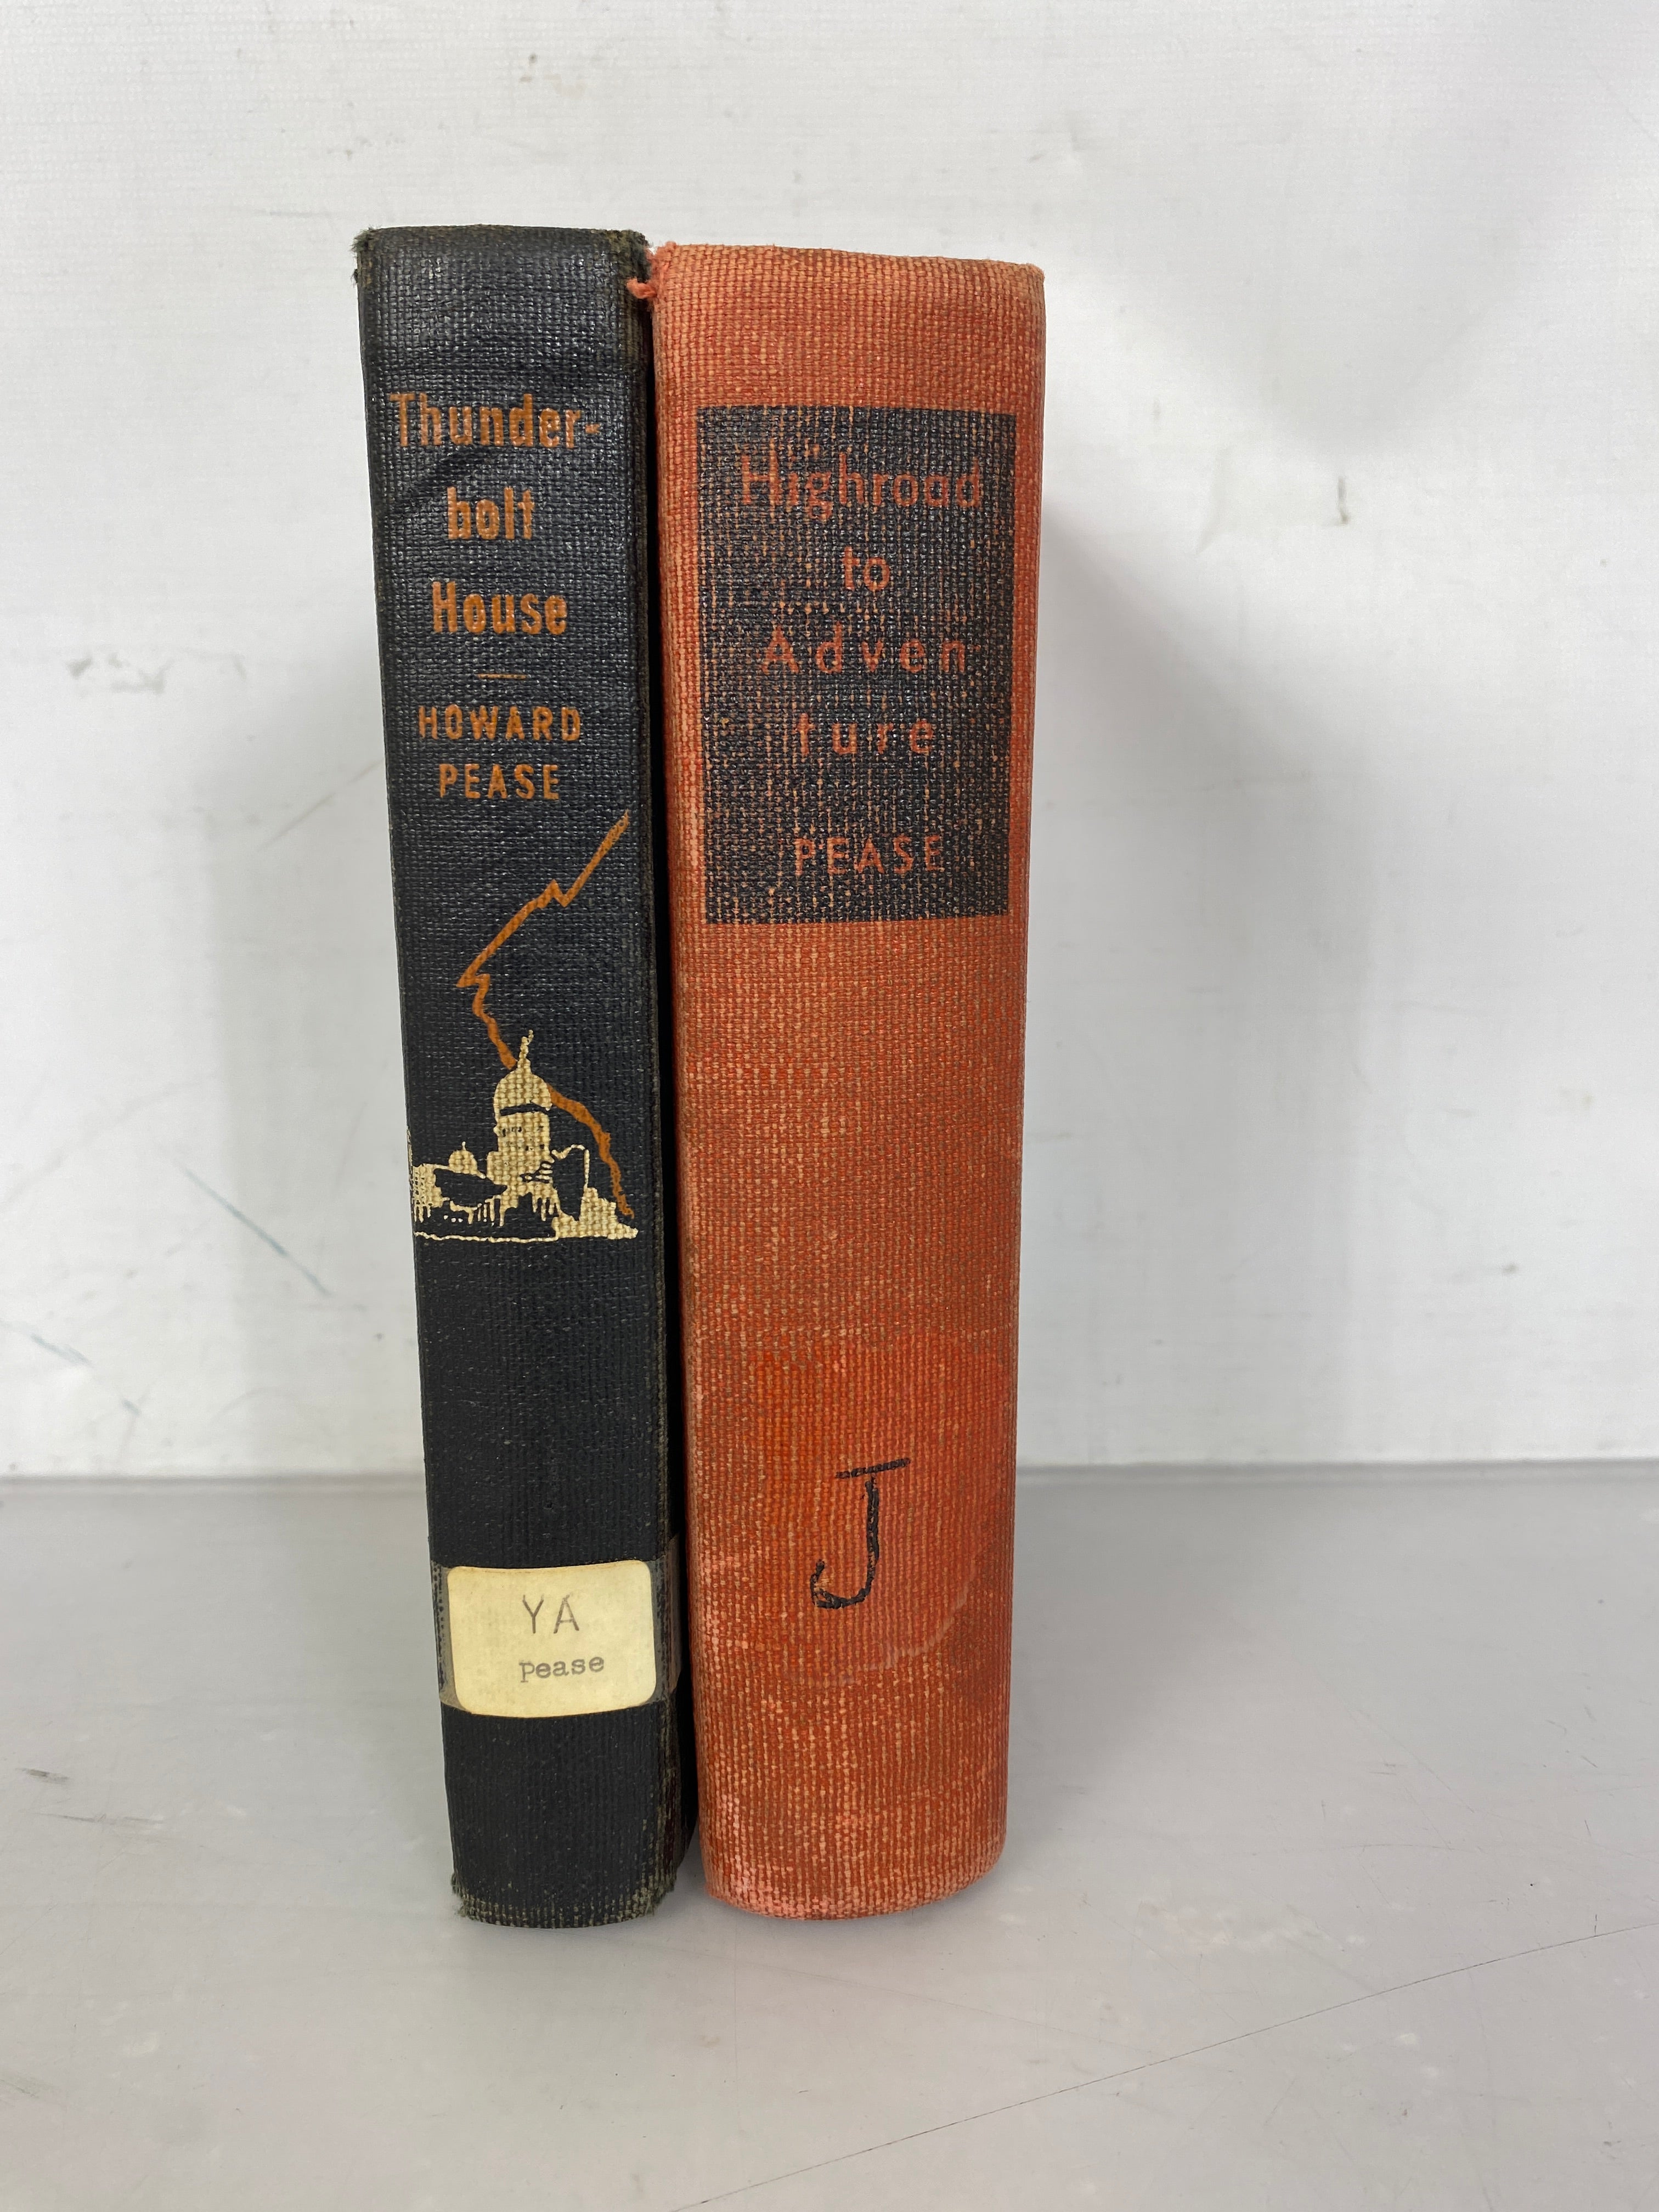 Lot of 2: Thunderbolt House 1944 / High Road to Adventure 1939  Howard Pease HC